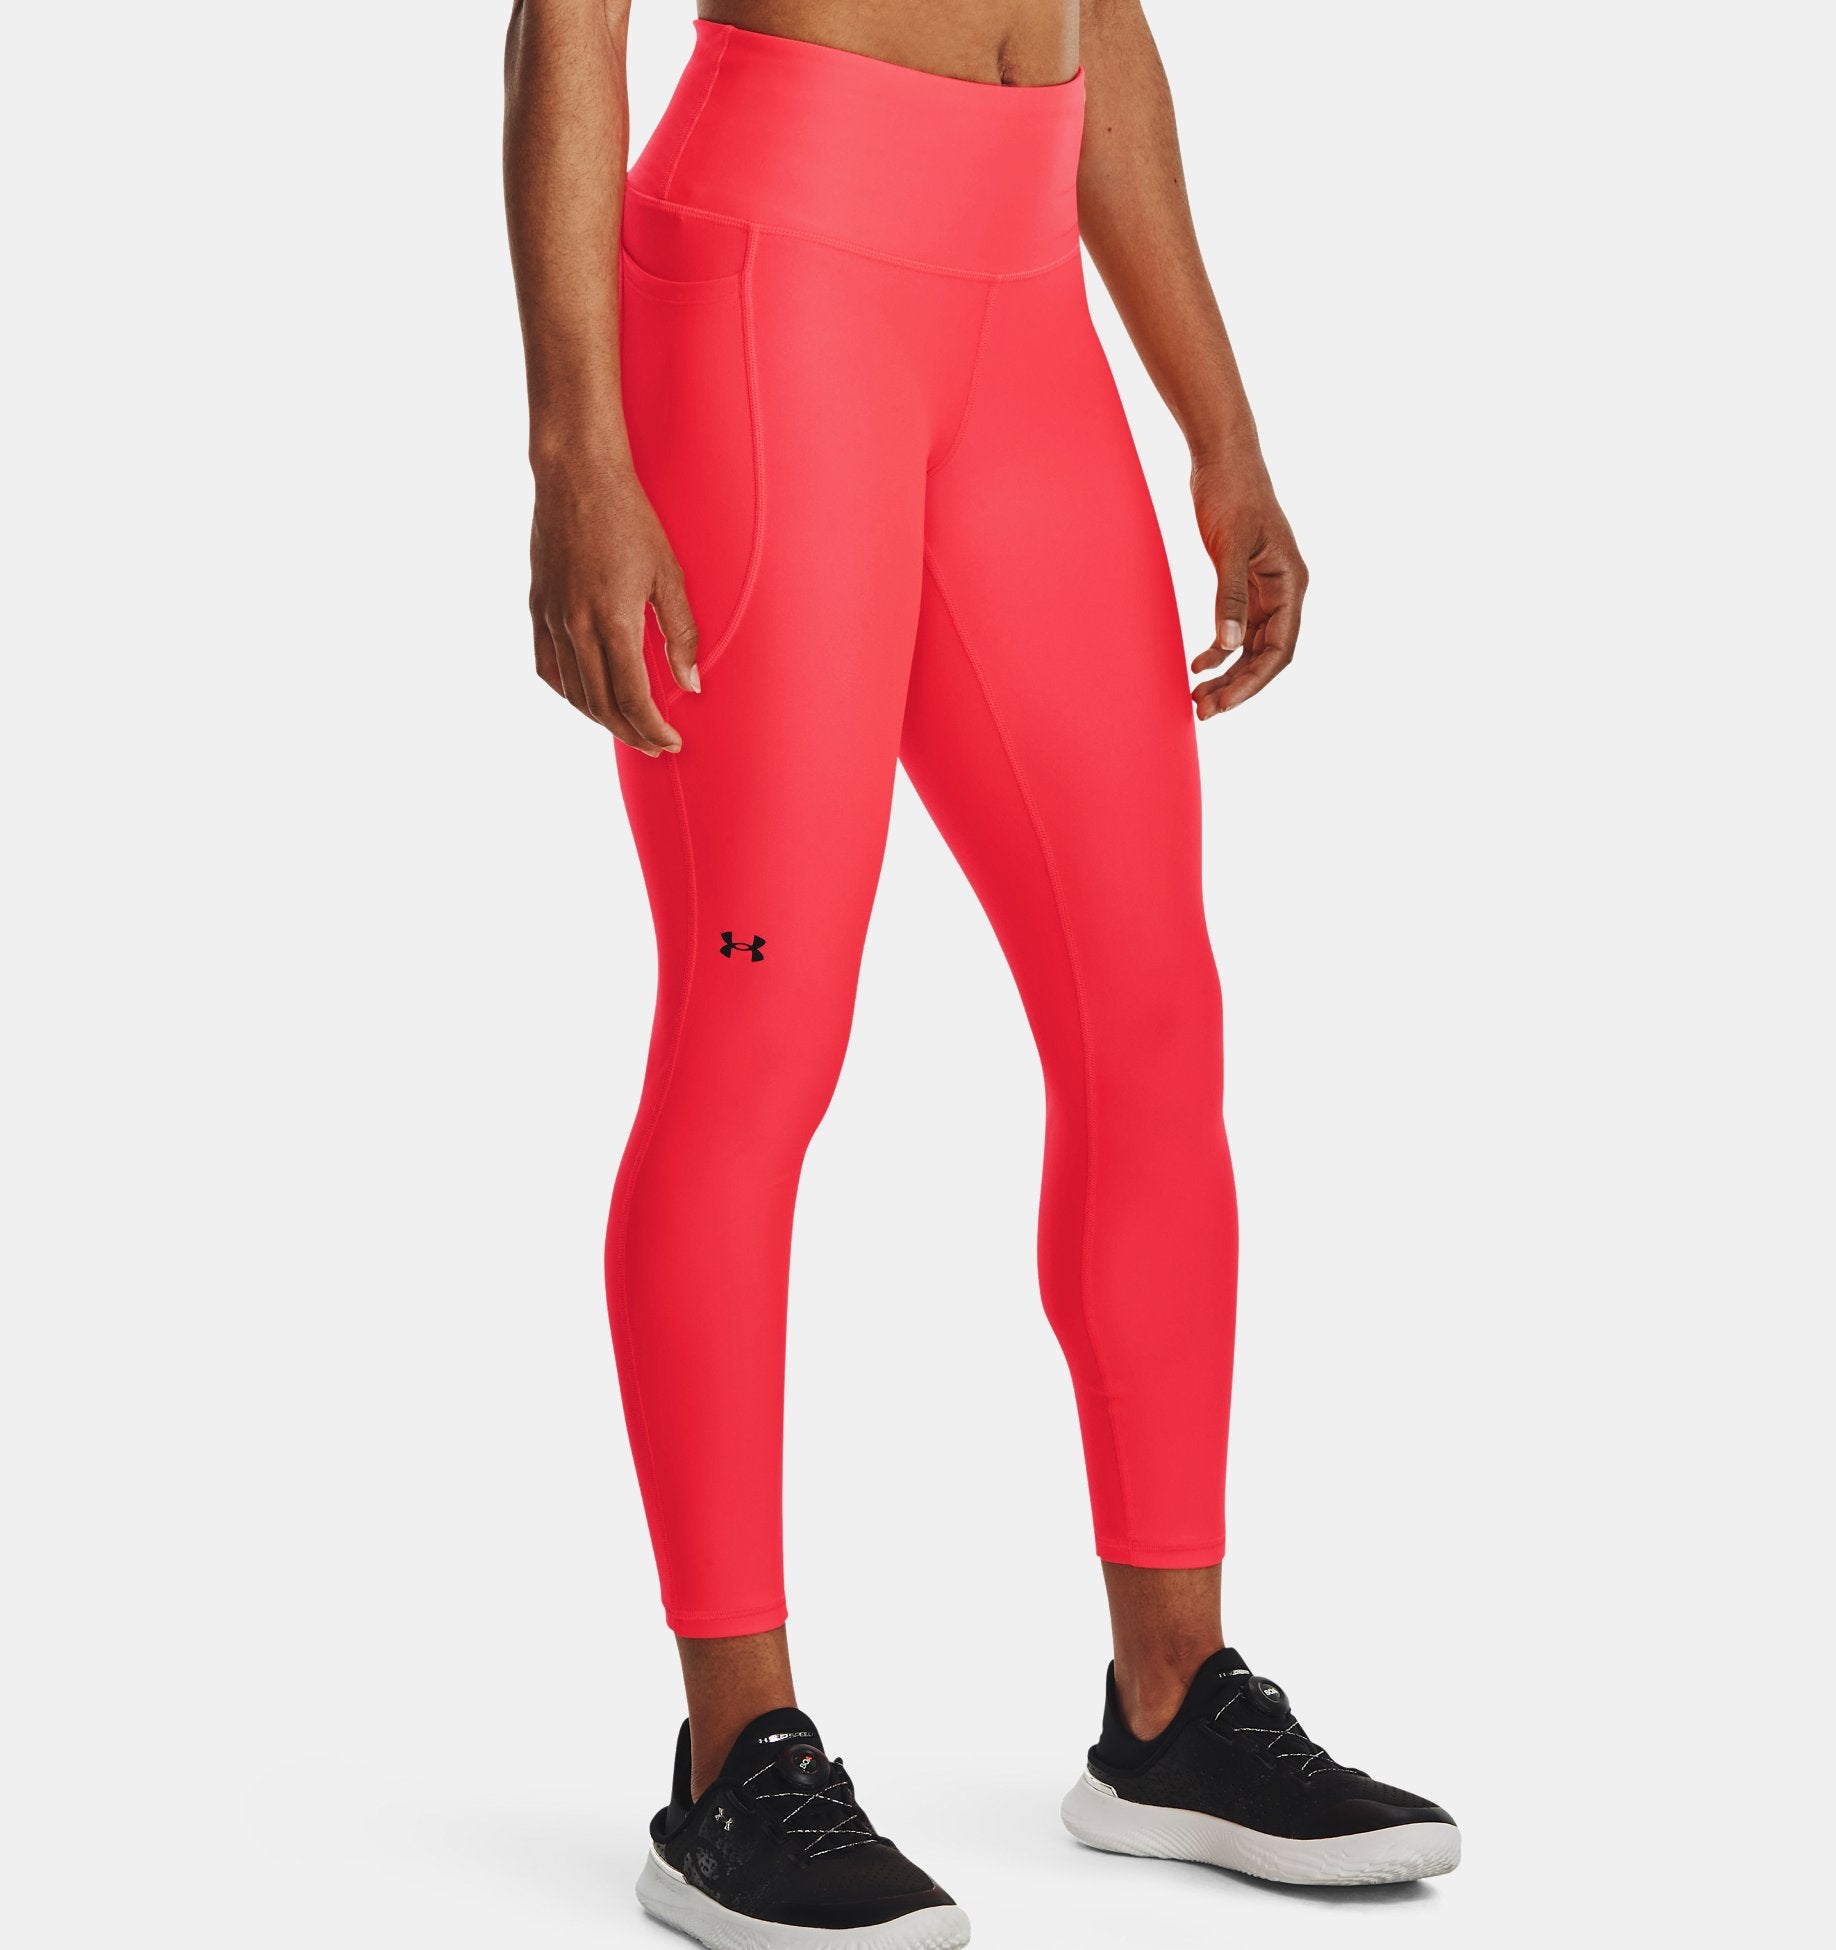 Under Armor Leggings W 1365338-664 – Your Sports Performance